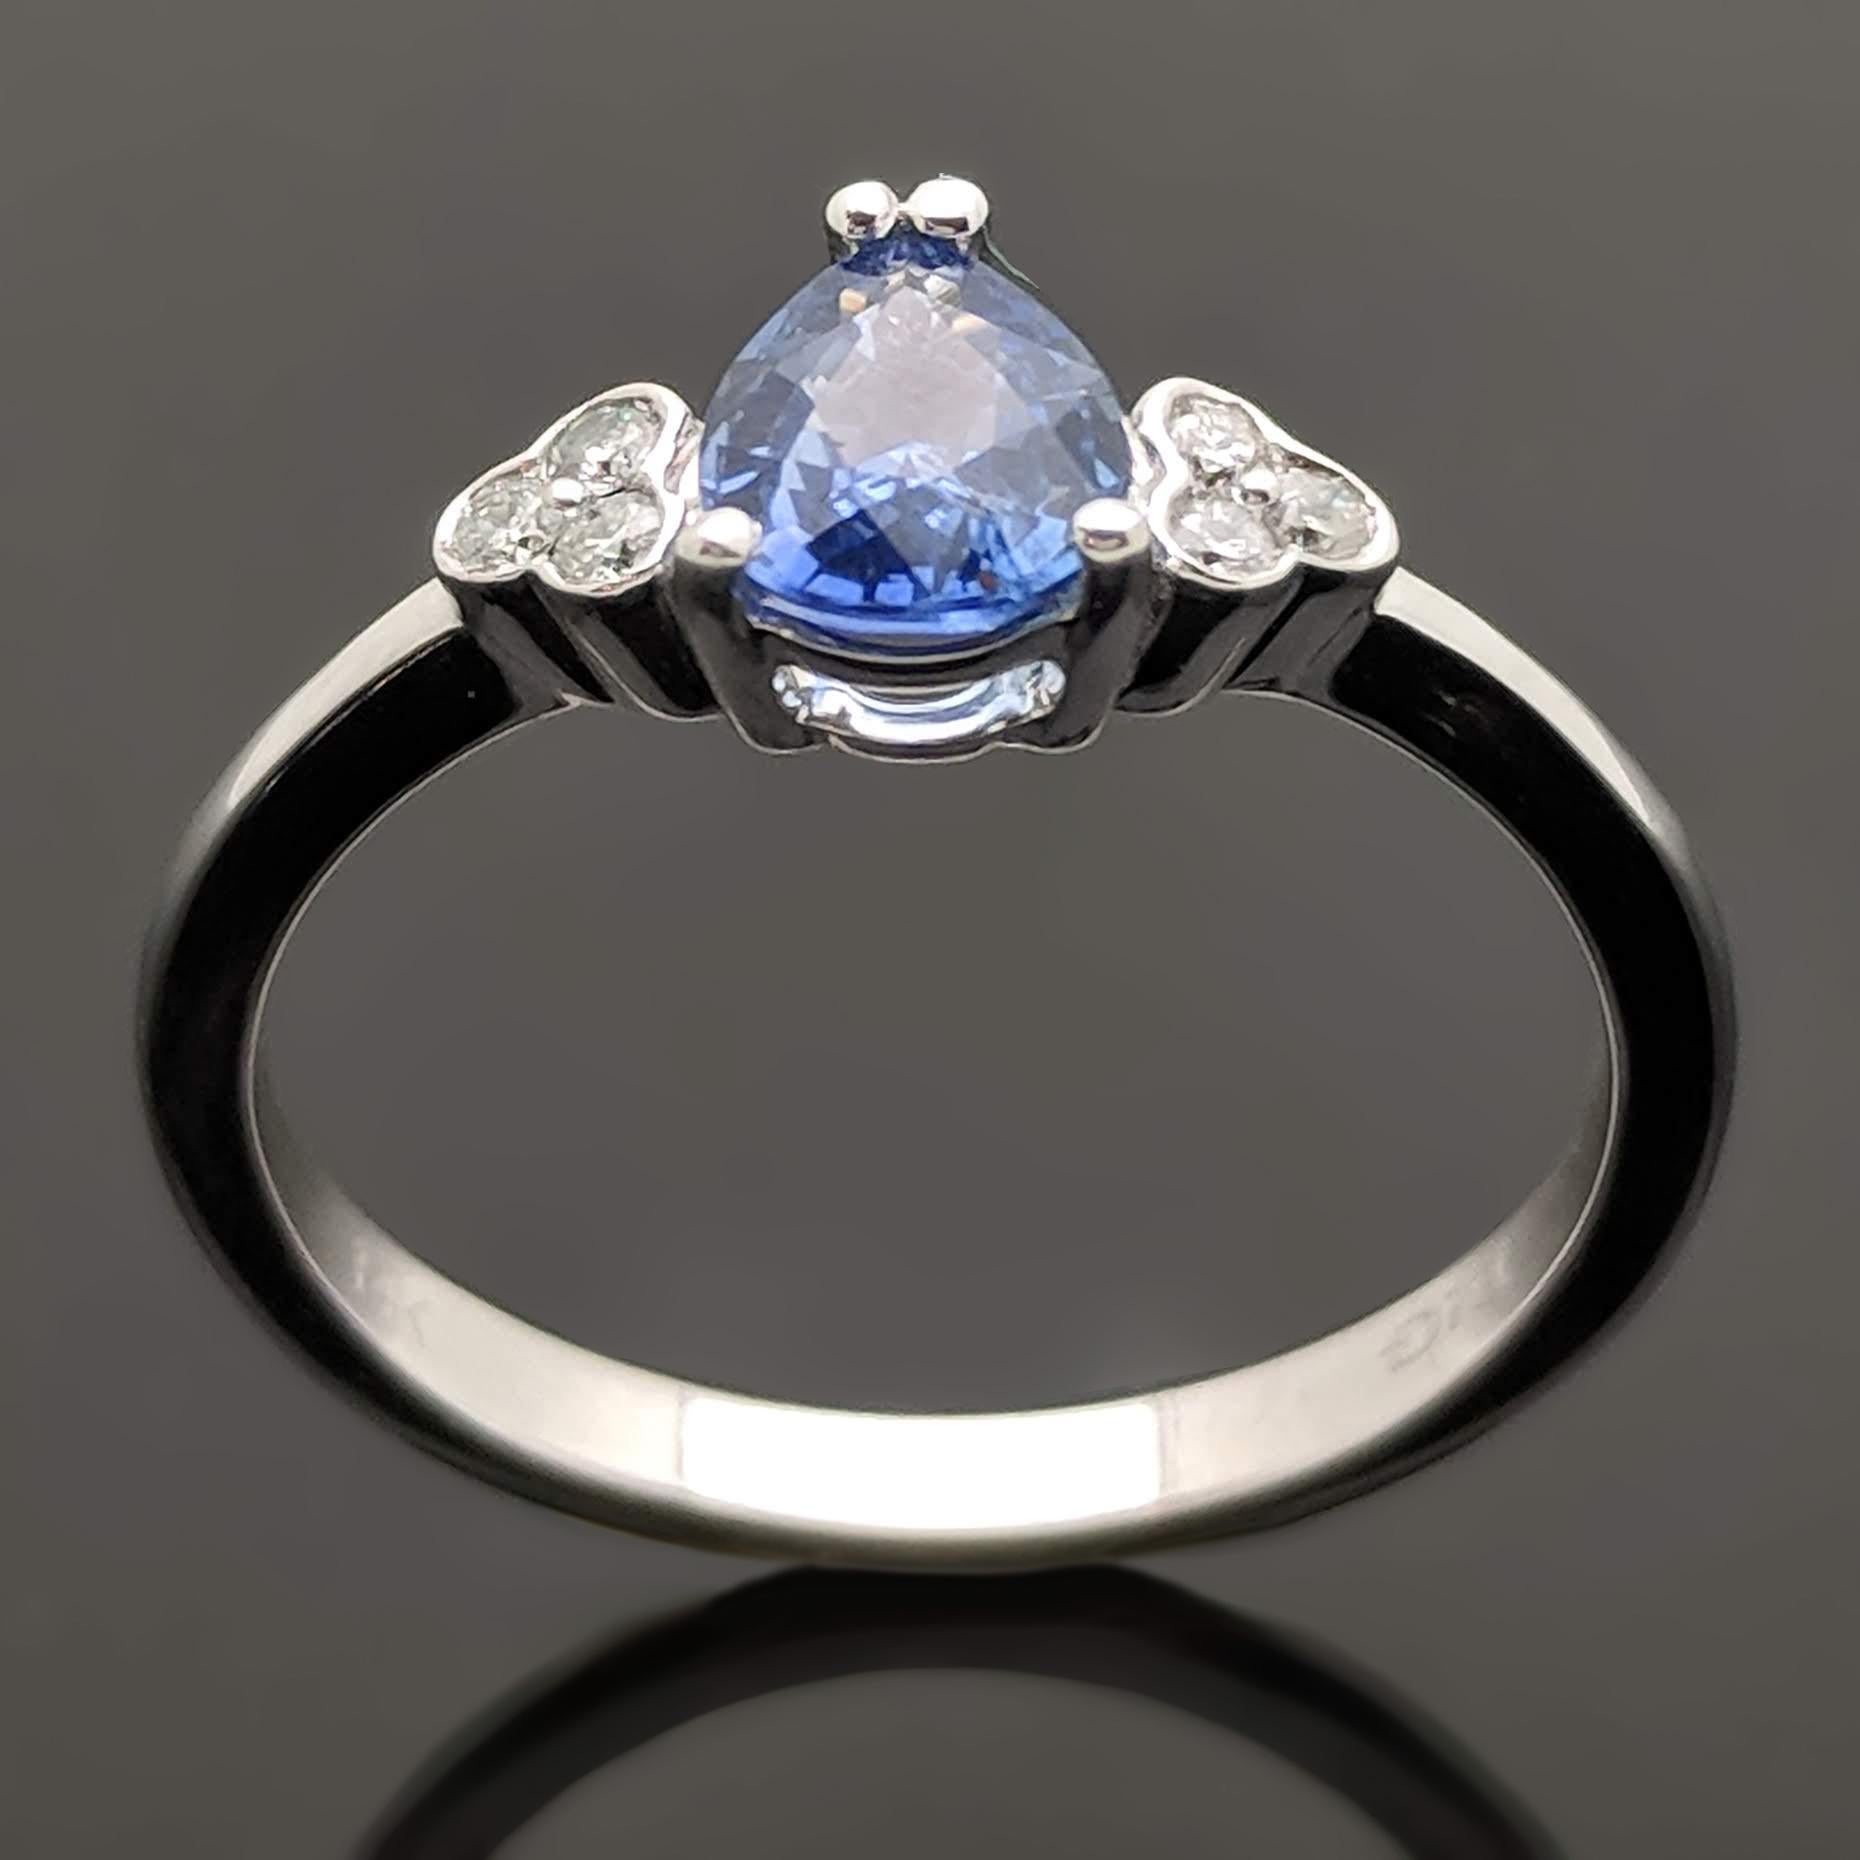 A 14kt white gold ring setting with a gorgeous pear-cut blue sapphire estimated at 0.74ct. The sapphire has 3 bezel-set diamonds on each side with an estimated 0.07cttw. Estimated weight of gold is 2.3 gr. 

We will size it for you.